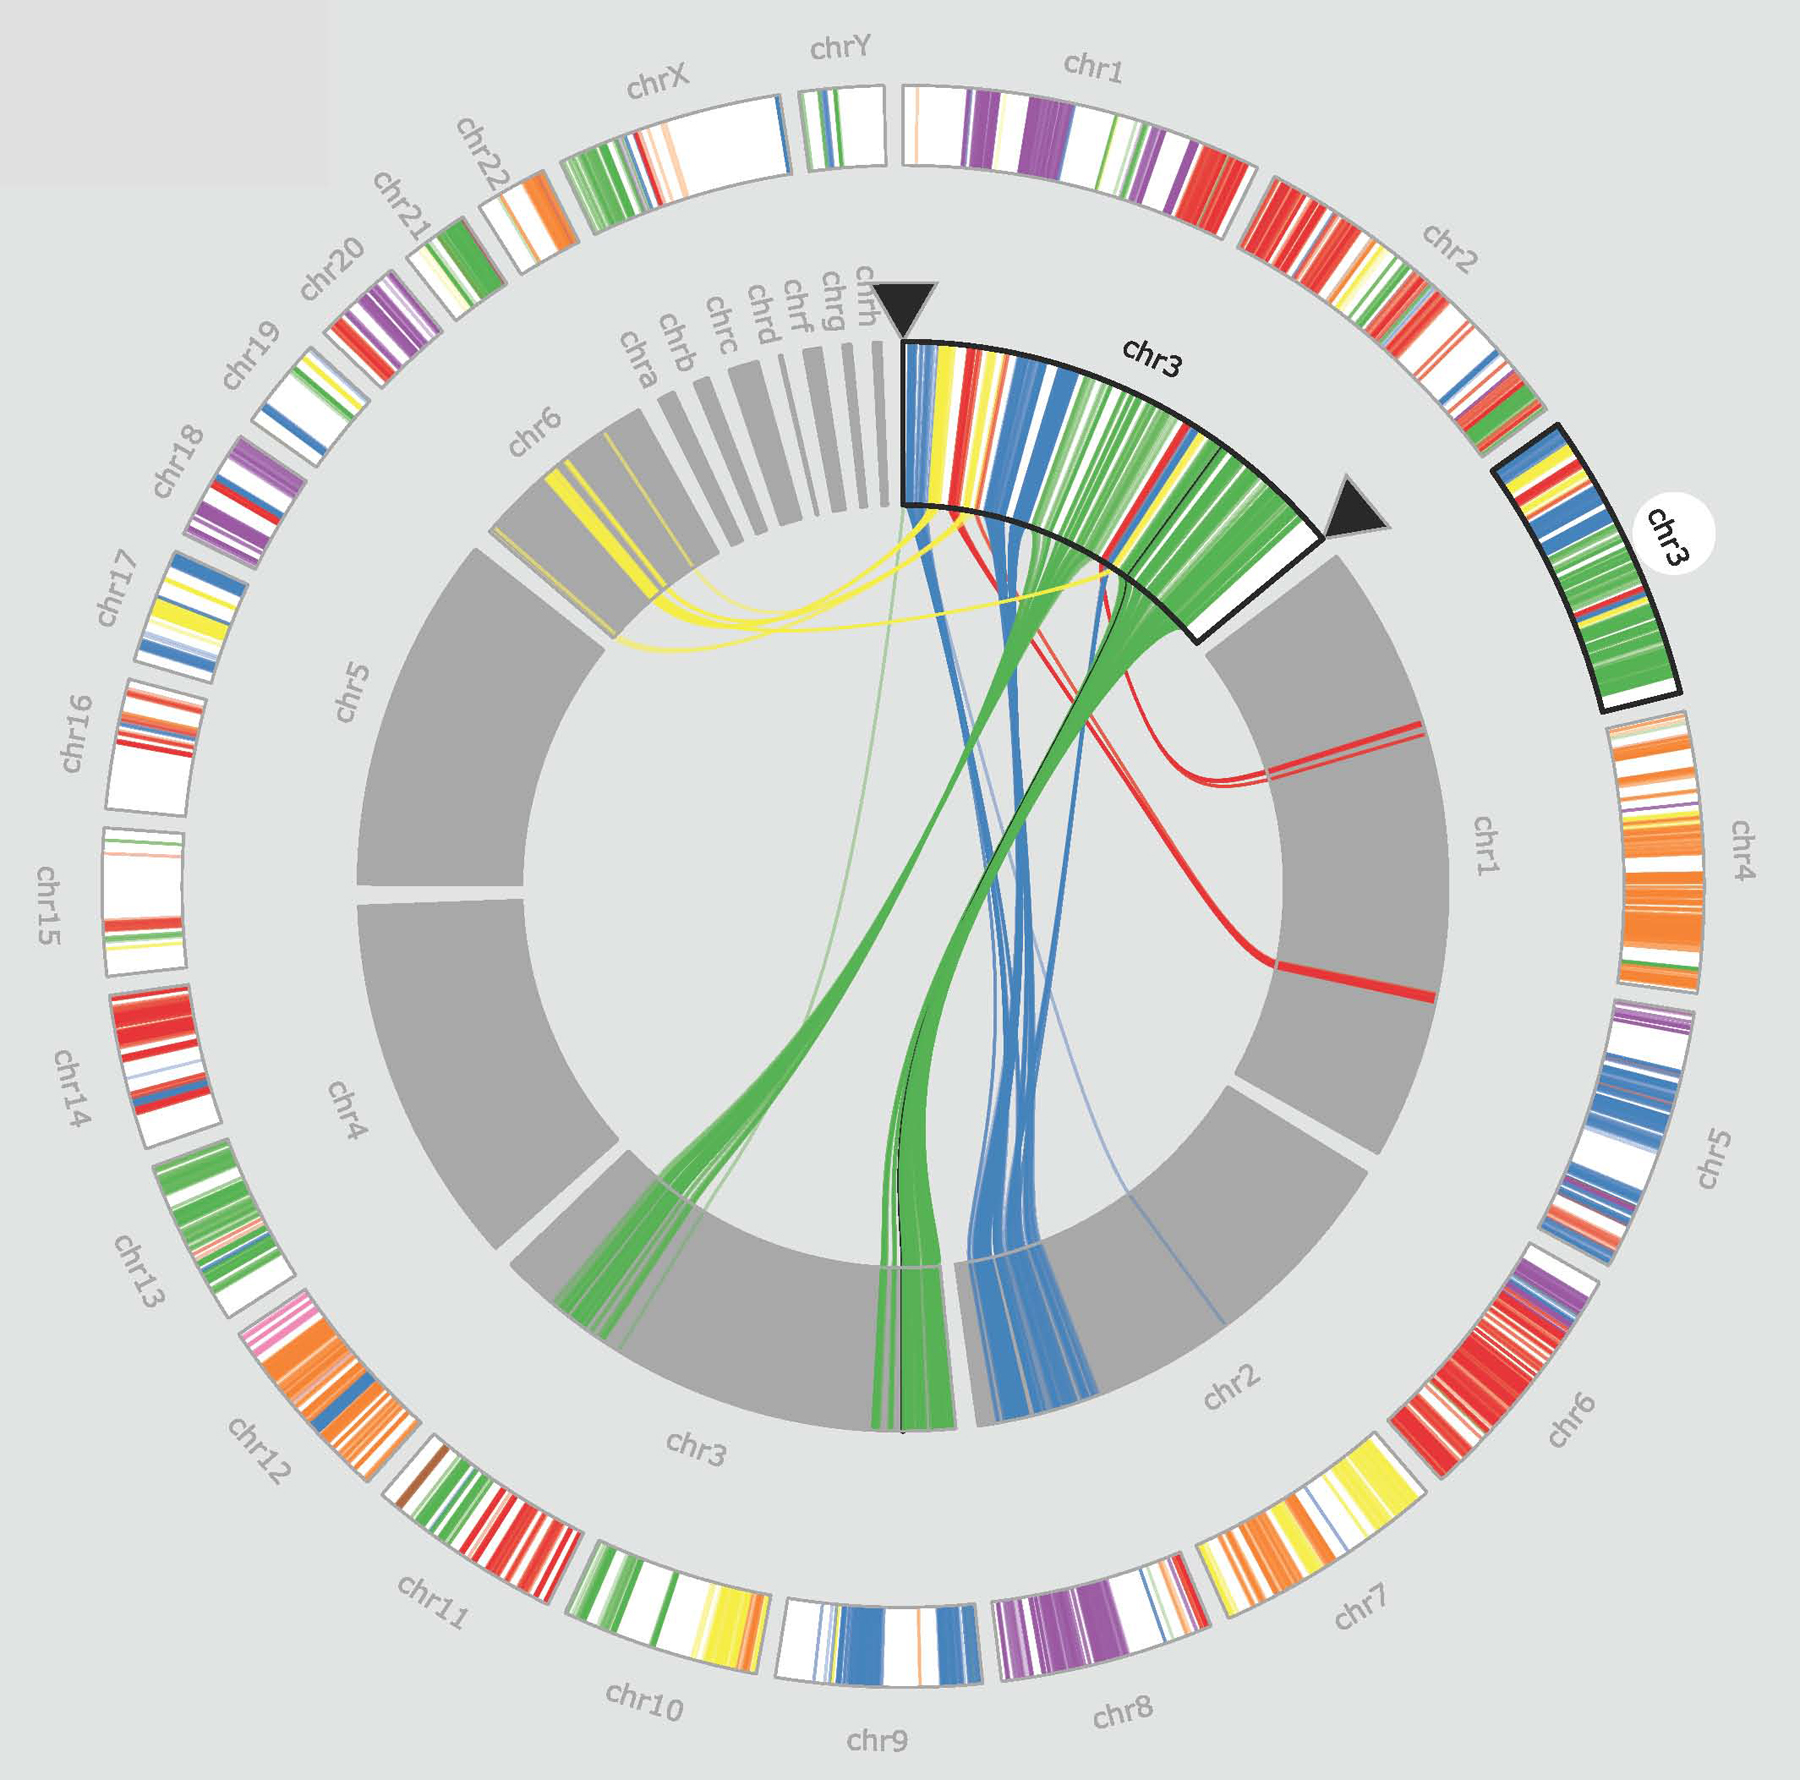 This visualization is part of the MizBee software (www.mizbee.org), which allows biologists to visualize and explore similarities in the DNA of different organisms. In this image the human genome is compared with the genome of a lizard -- each colored curve in the inner ring indicates a similar strand of DNA that appears in both genomes. Scientists are using MizBee to answer biological questions such how the genome supports adaptivity in a species.